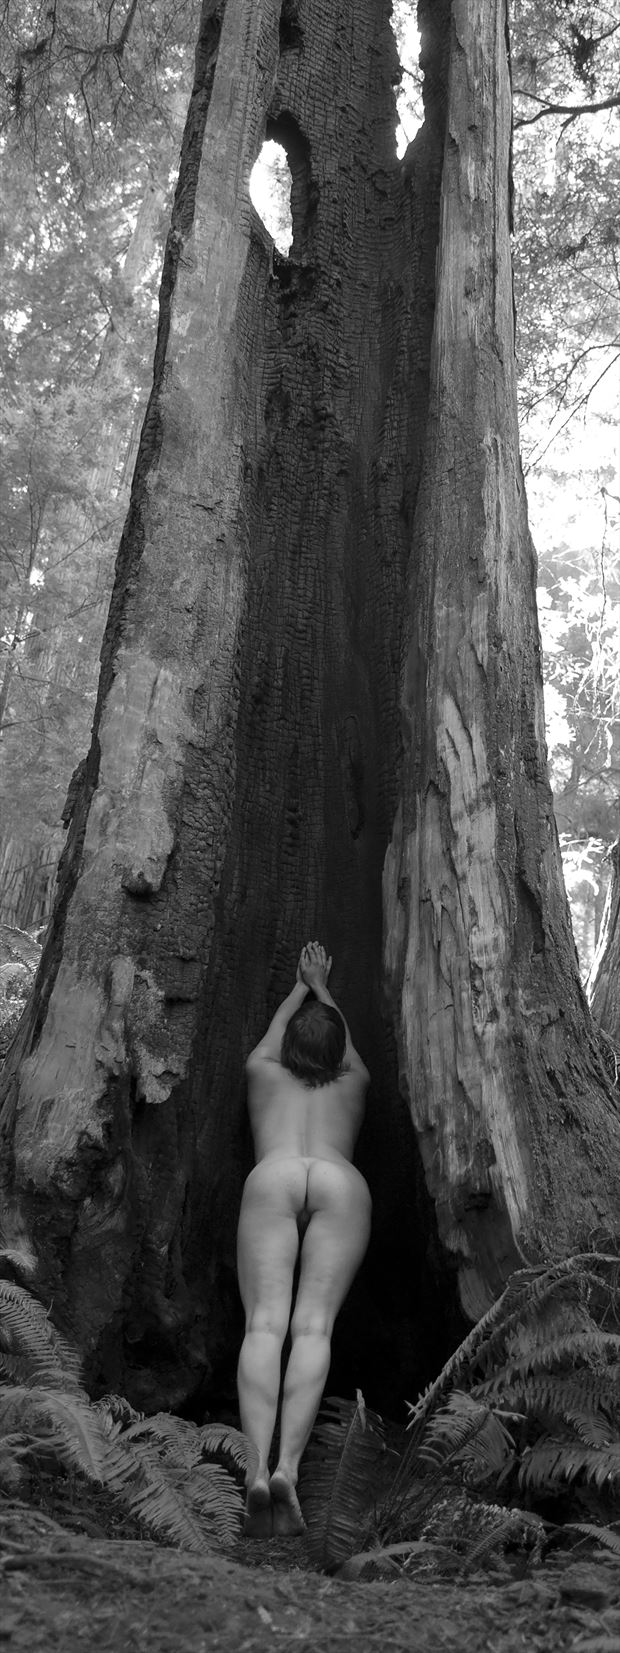 burnt redwood artistic nude photo by photographer eric lowenberg